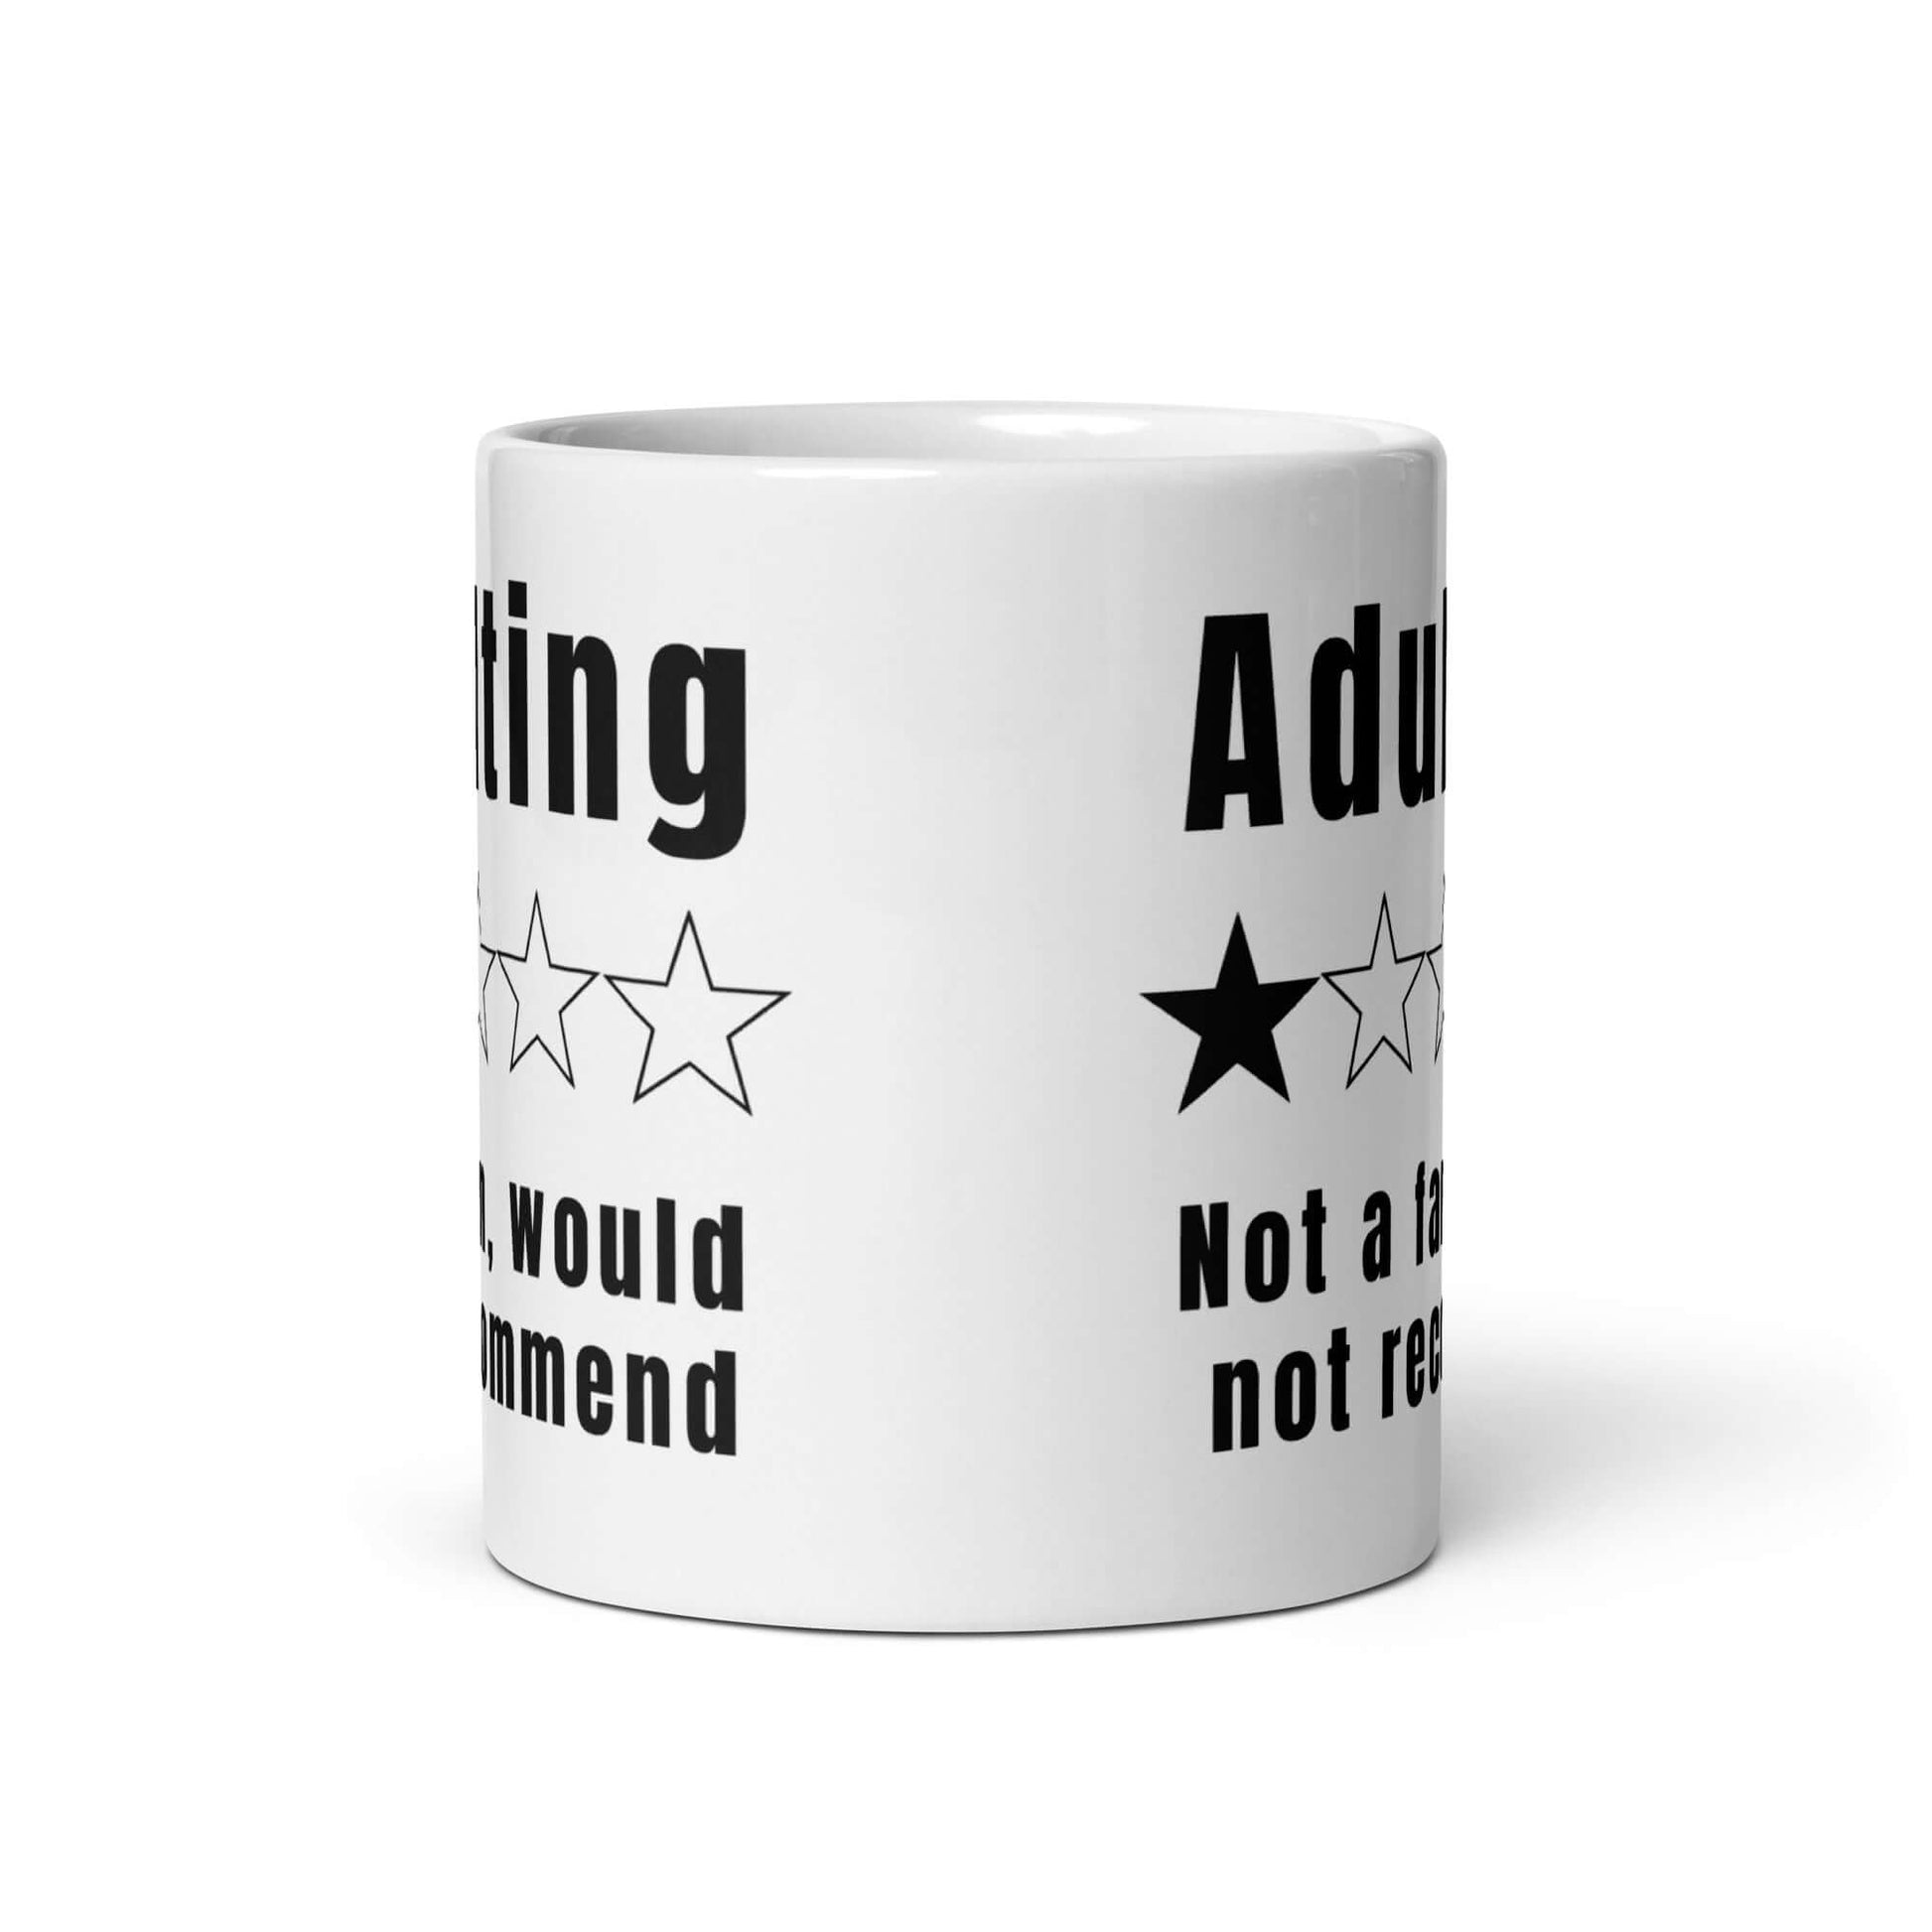 Adulting - Not a fan would not recommend - White glossy mug - Horrible Designs